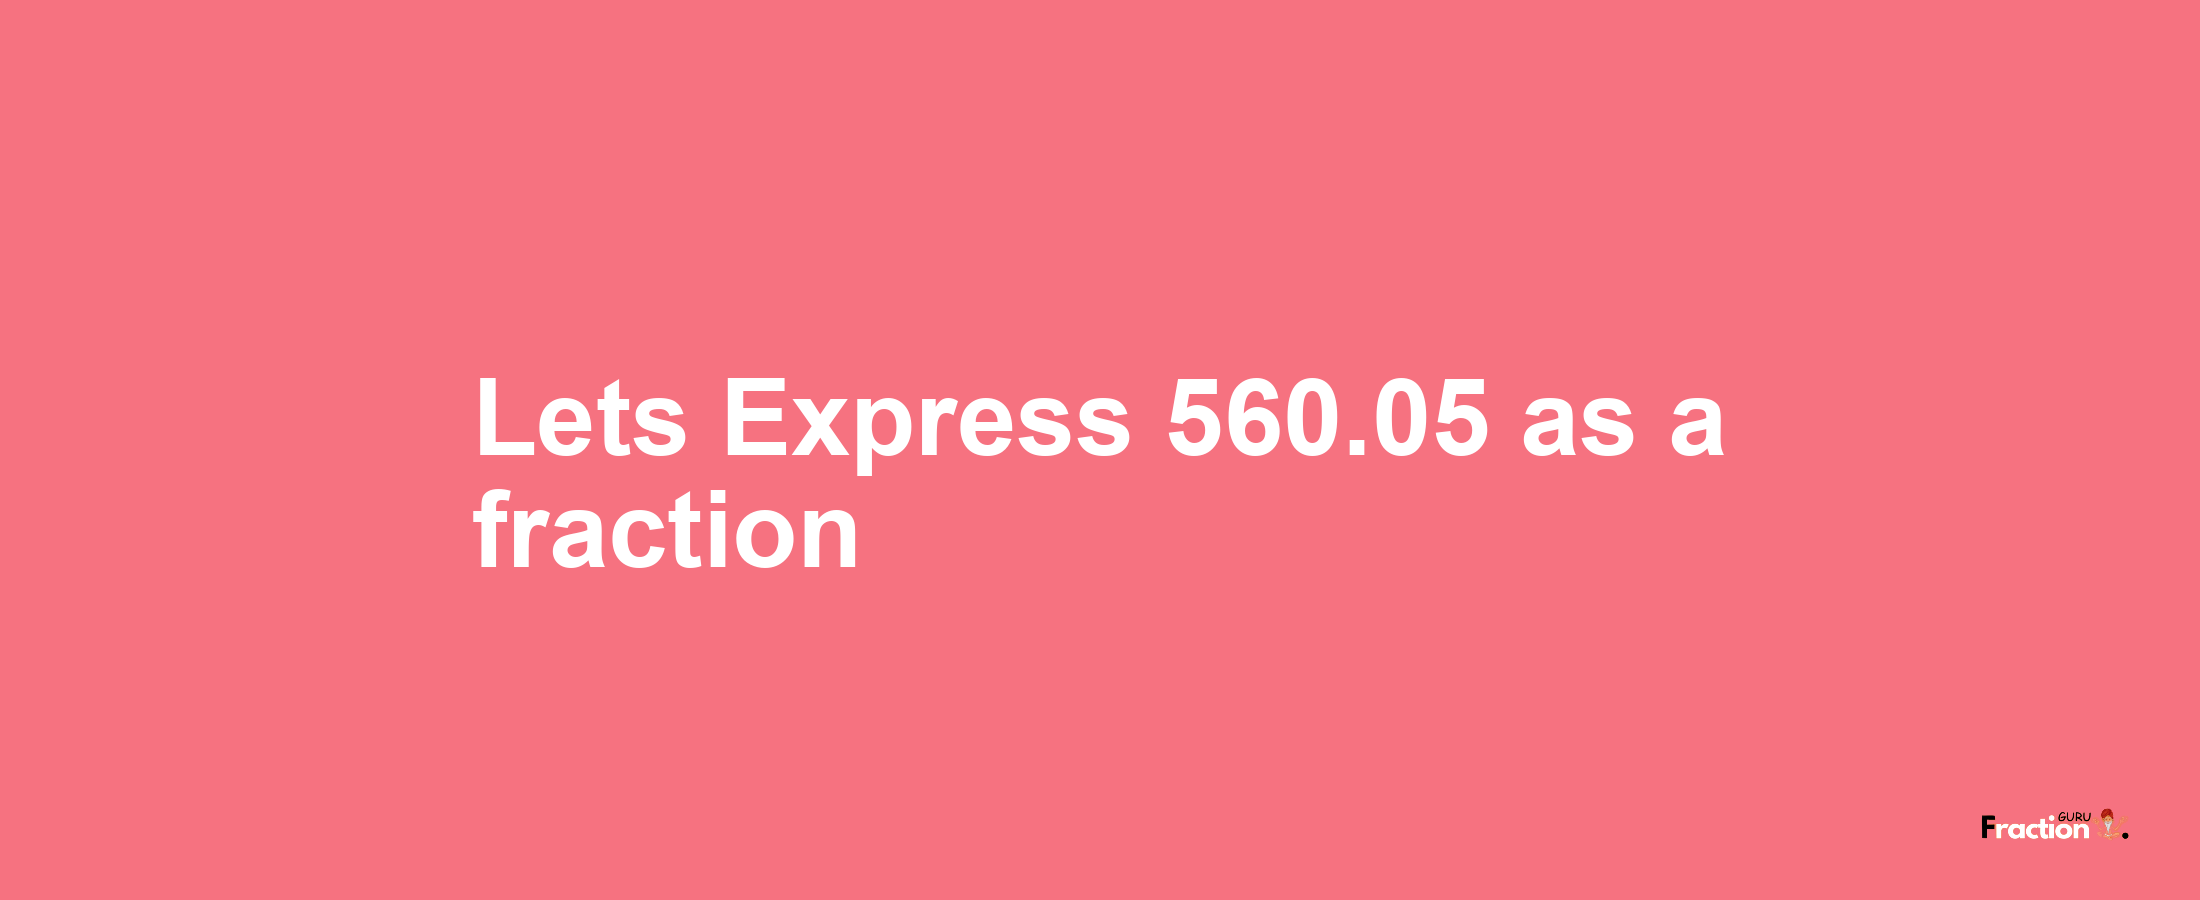 Lets Express 560.05 as afraction